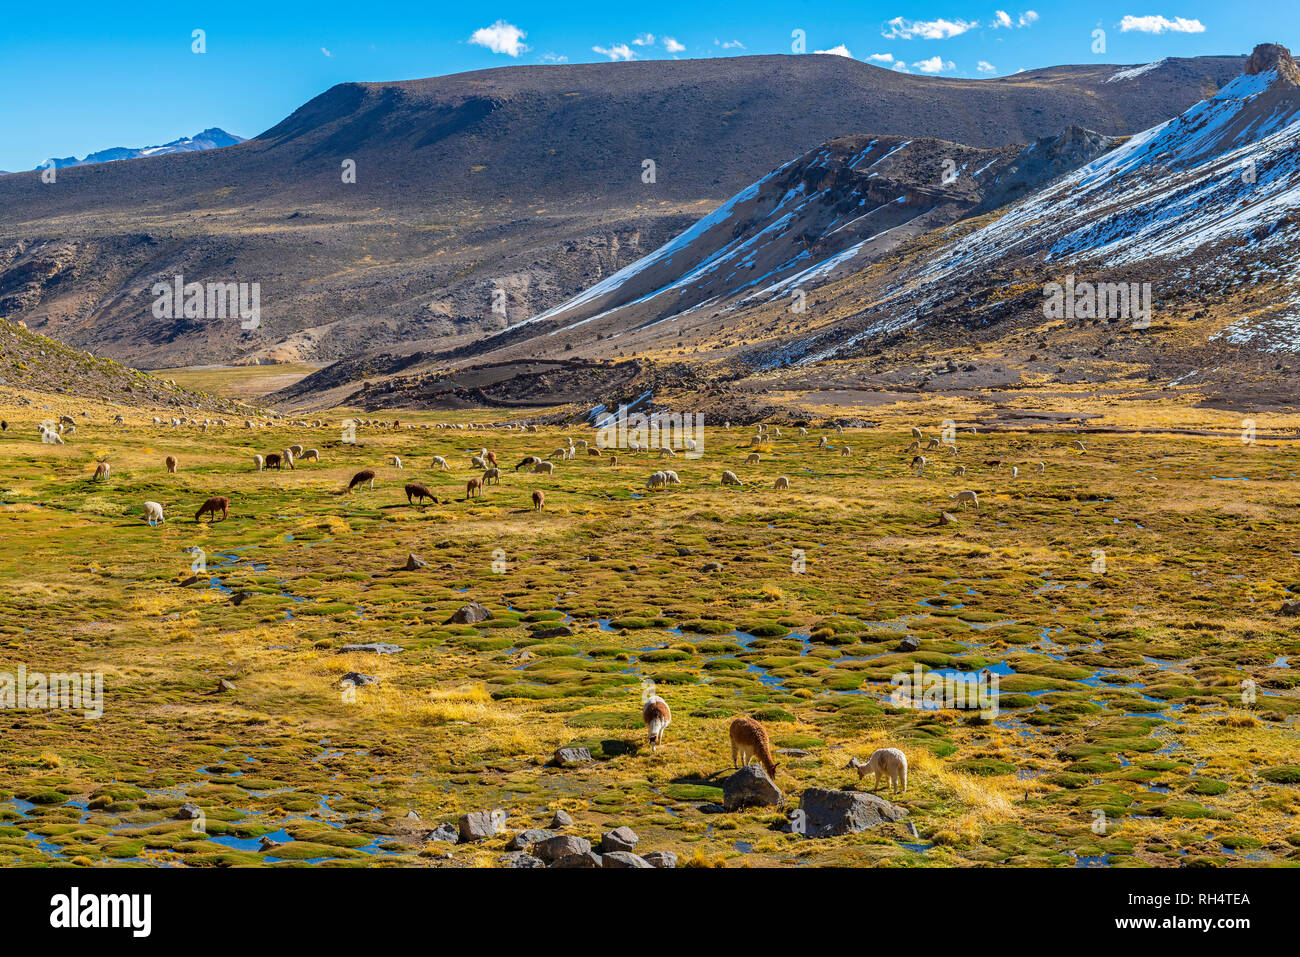 Hundreds of Alpacas and Llamas grazing in a fertile valley in the National Reserve of Salinas y Aguada Blanca by the Colca Canyon, Arequipa, Peru. Stock Photo